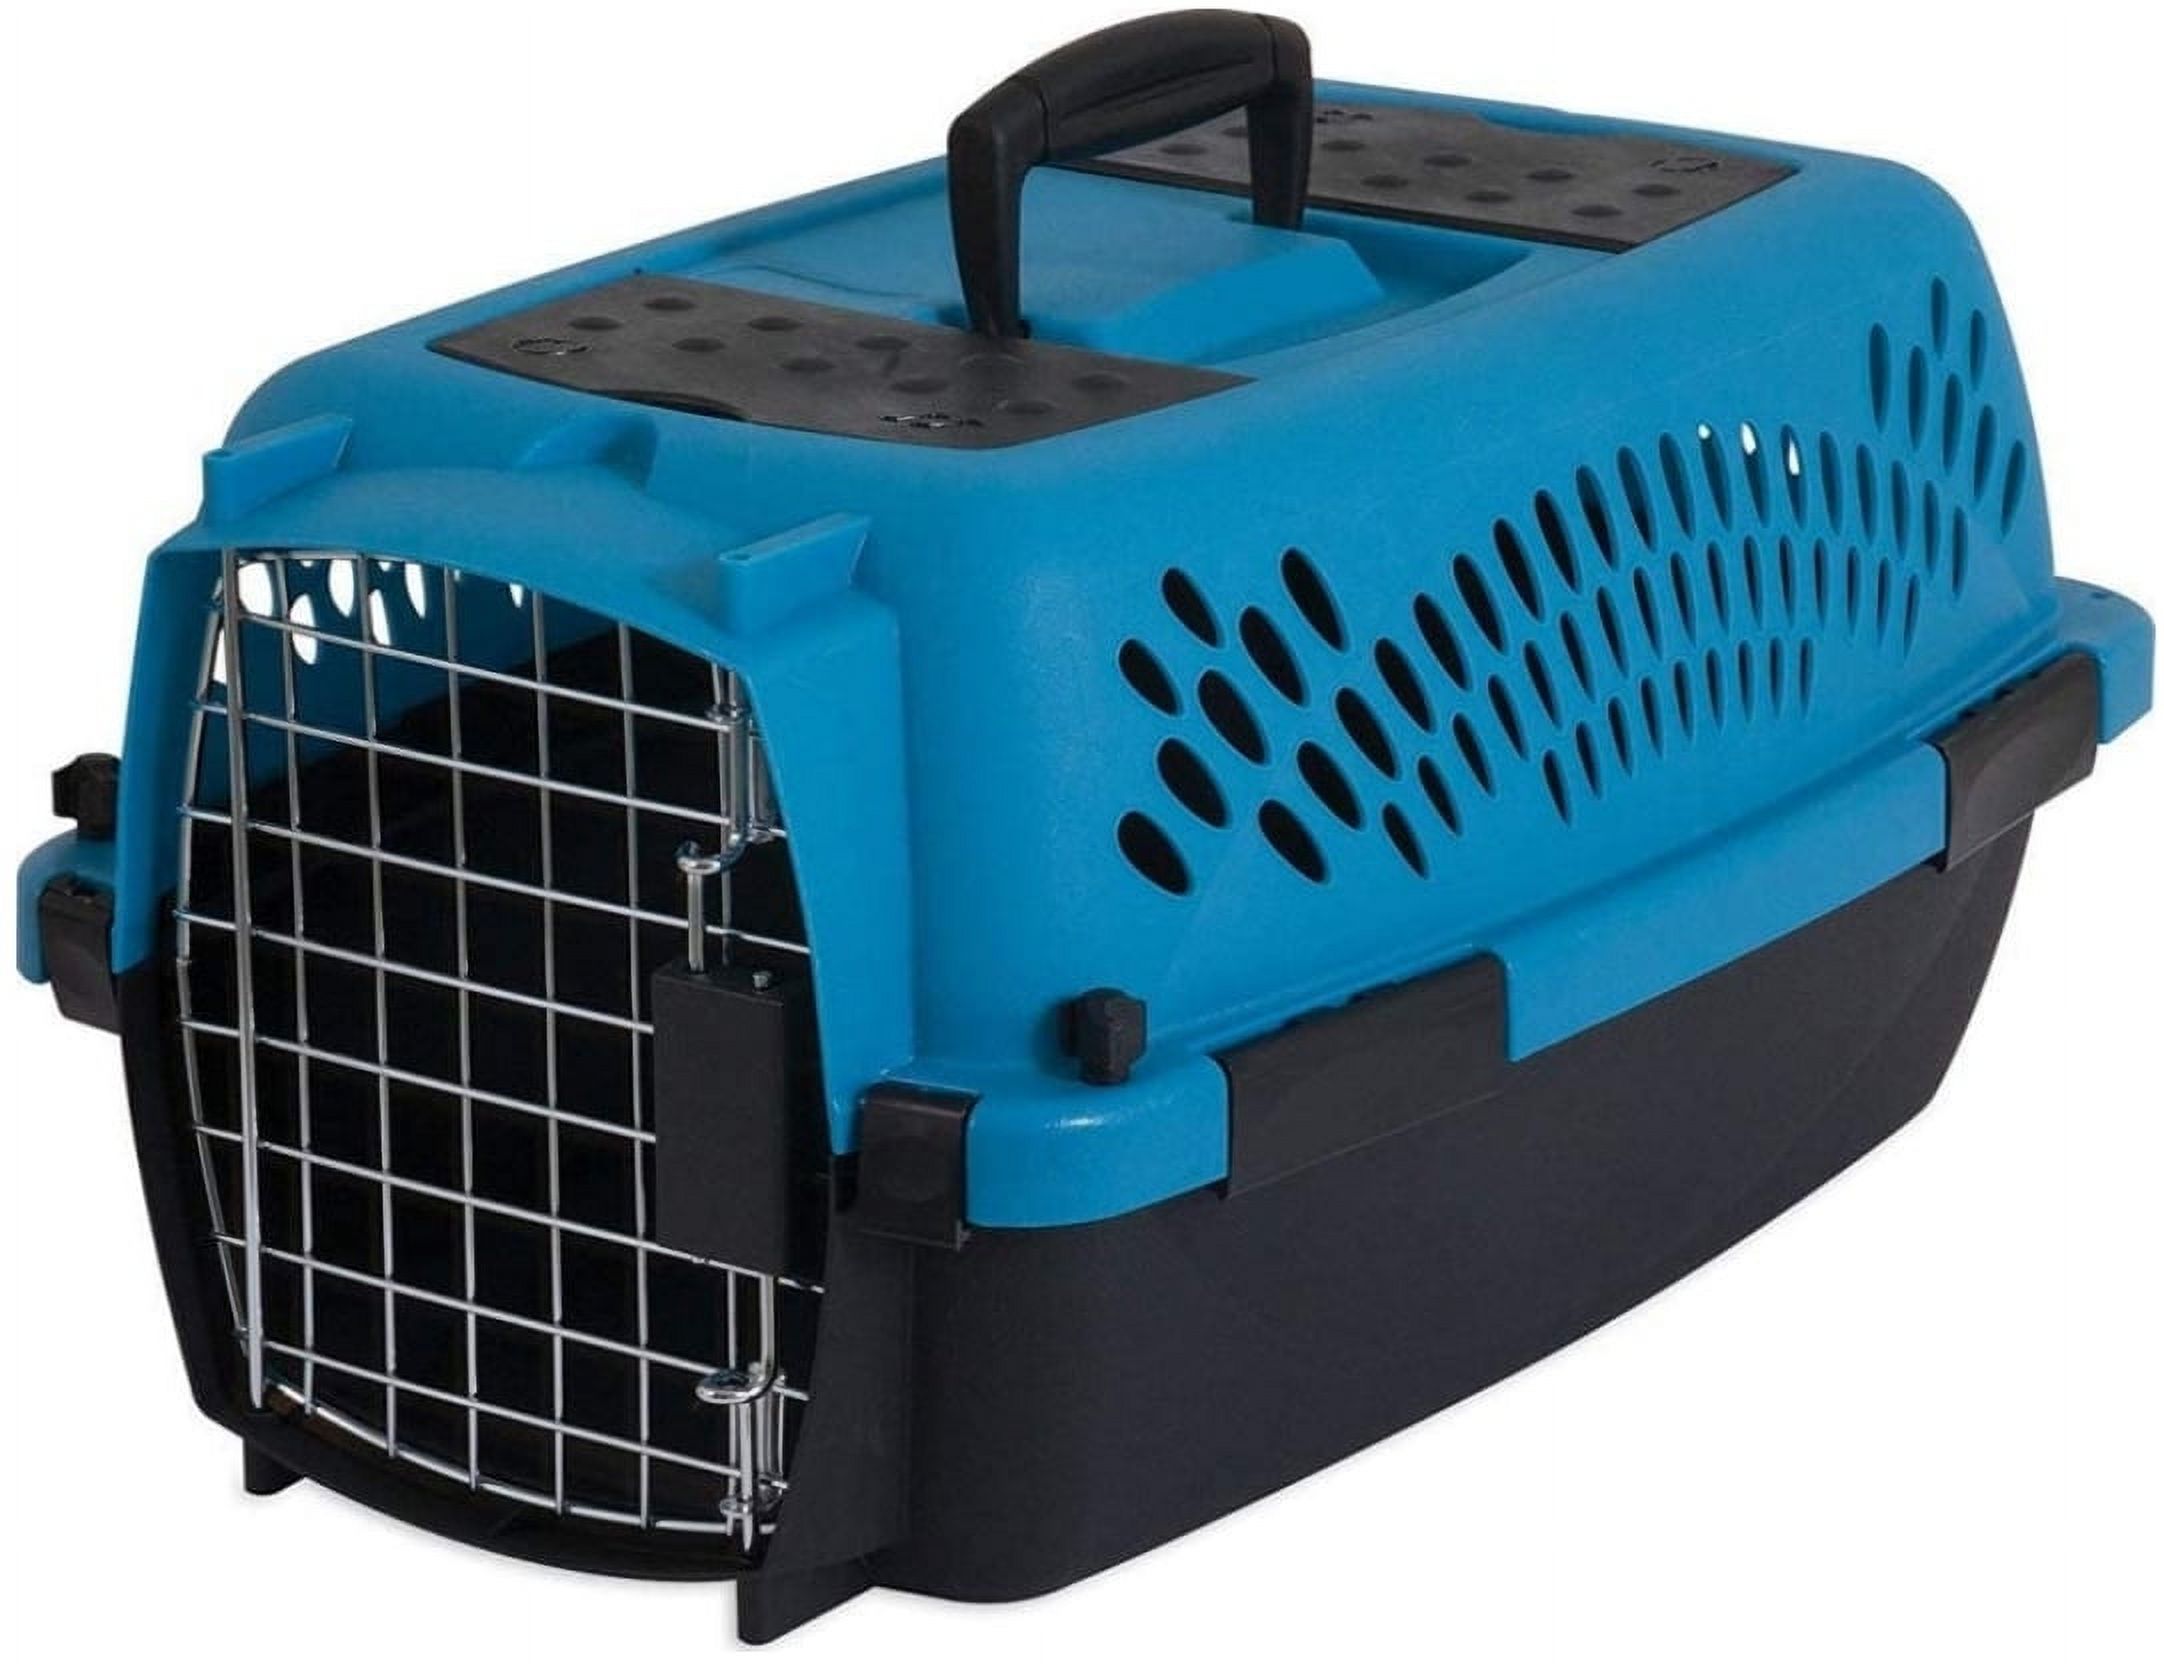 Petmate Pet Porter 19" Travel Fashion Dog Kennel Portable Small Pet Carrier for Dogs Upto 10 lb, Blue - image 1 of 8